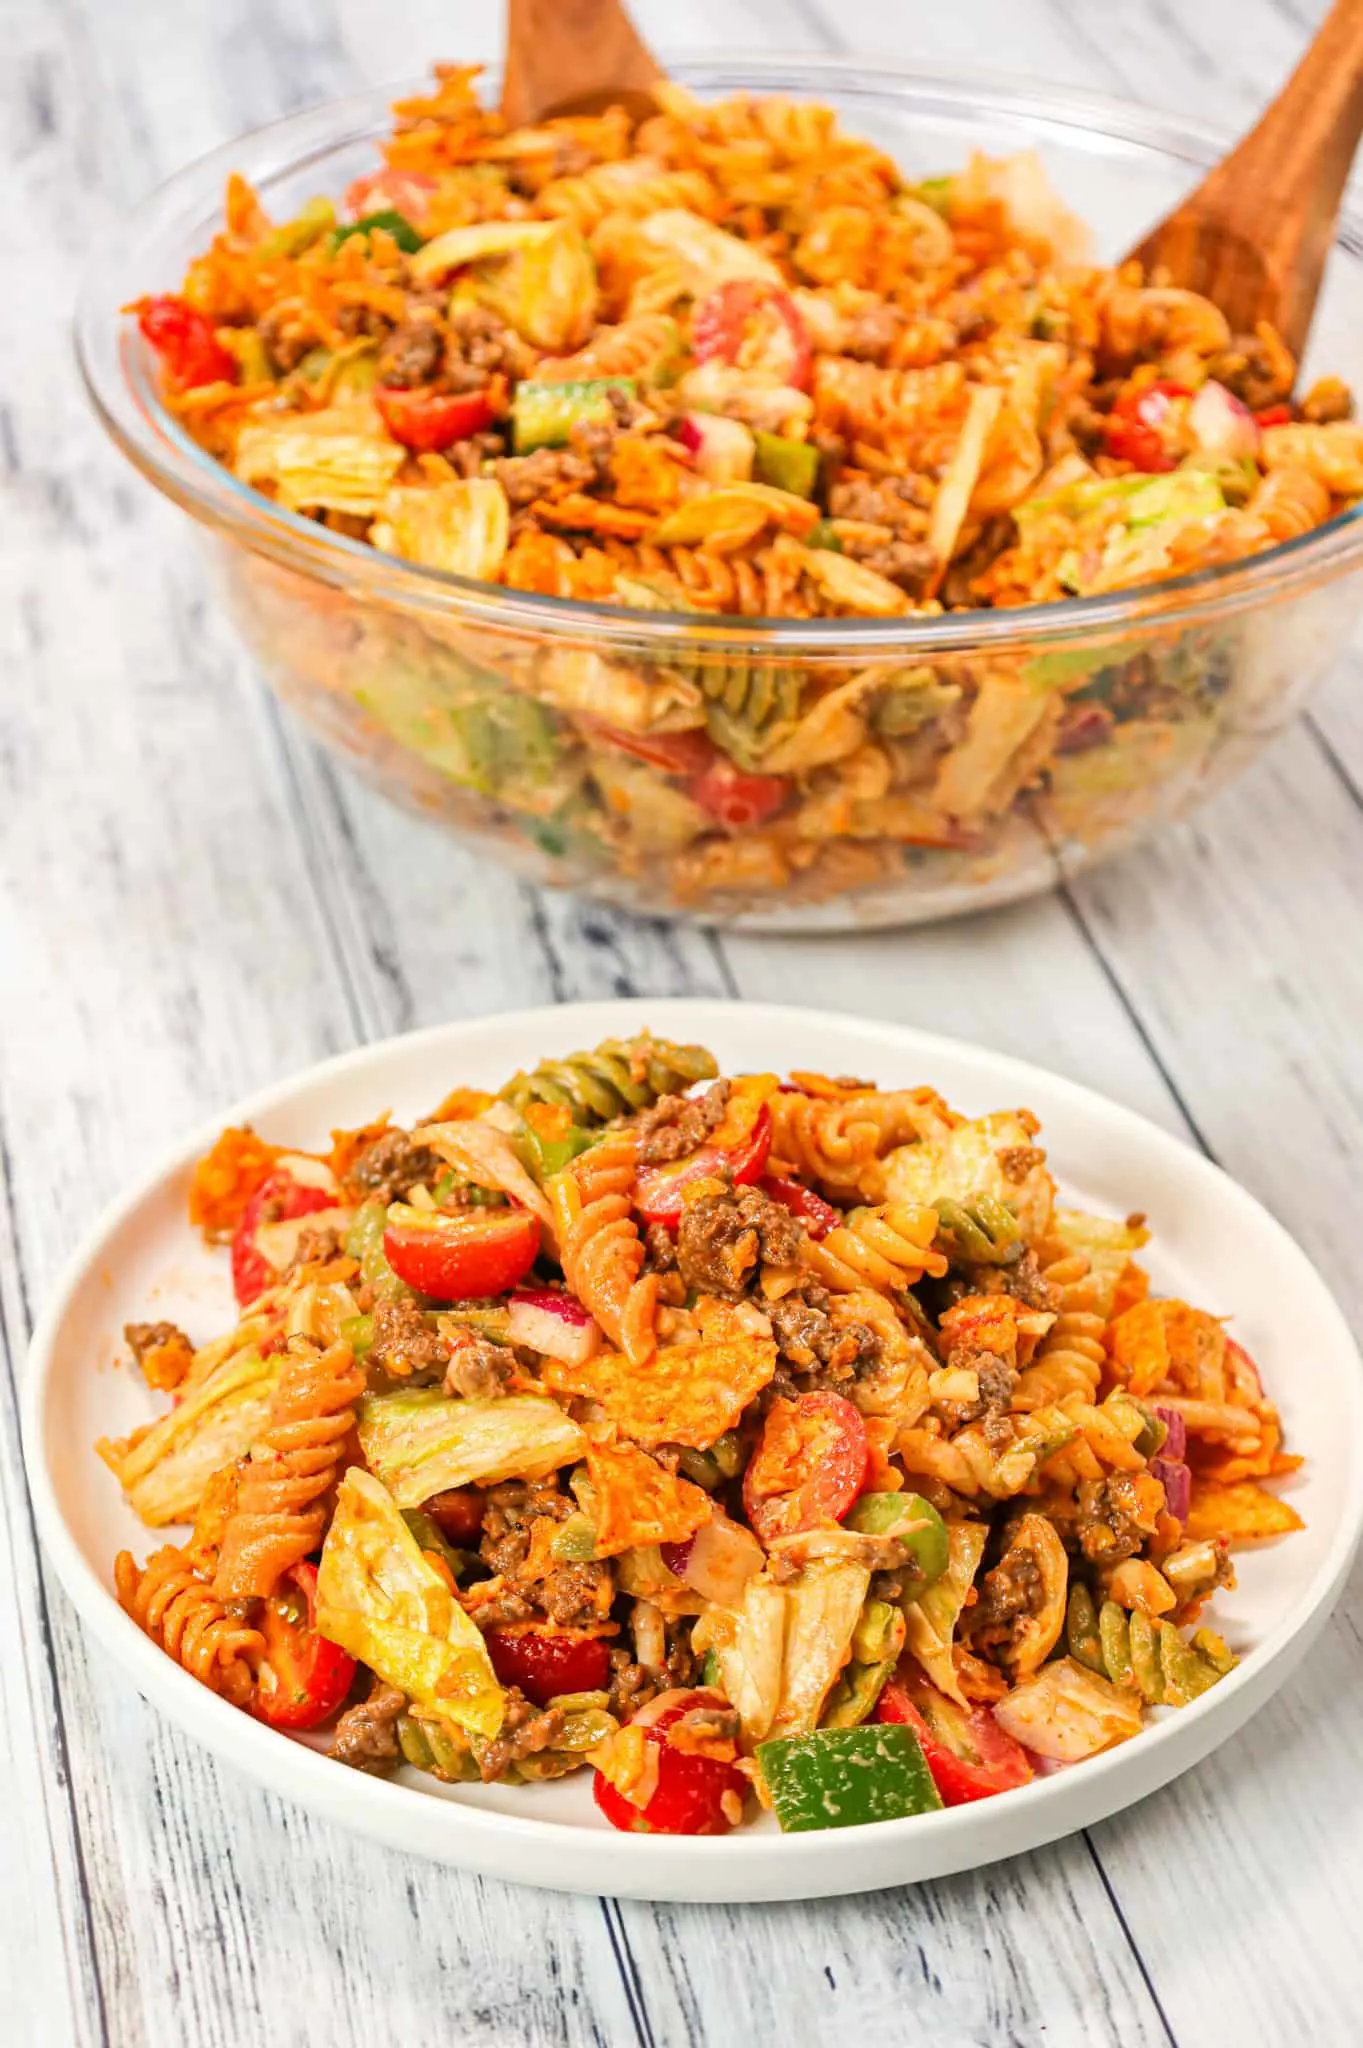 Taco Pasta Salad is the perfect party side dish loaded with tri-colour rotini pasta, taco seasoned ground beef, iceberg lettuce, onions, tomatoes, green peppers, shredded cheese, salsa, ranch dressing and crumbled Doritos nacho chips.